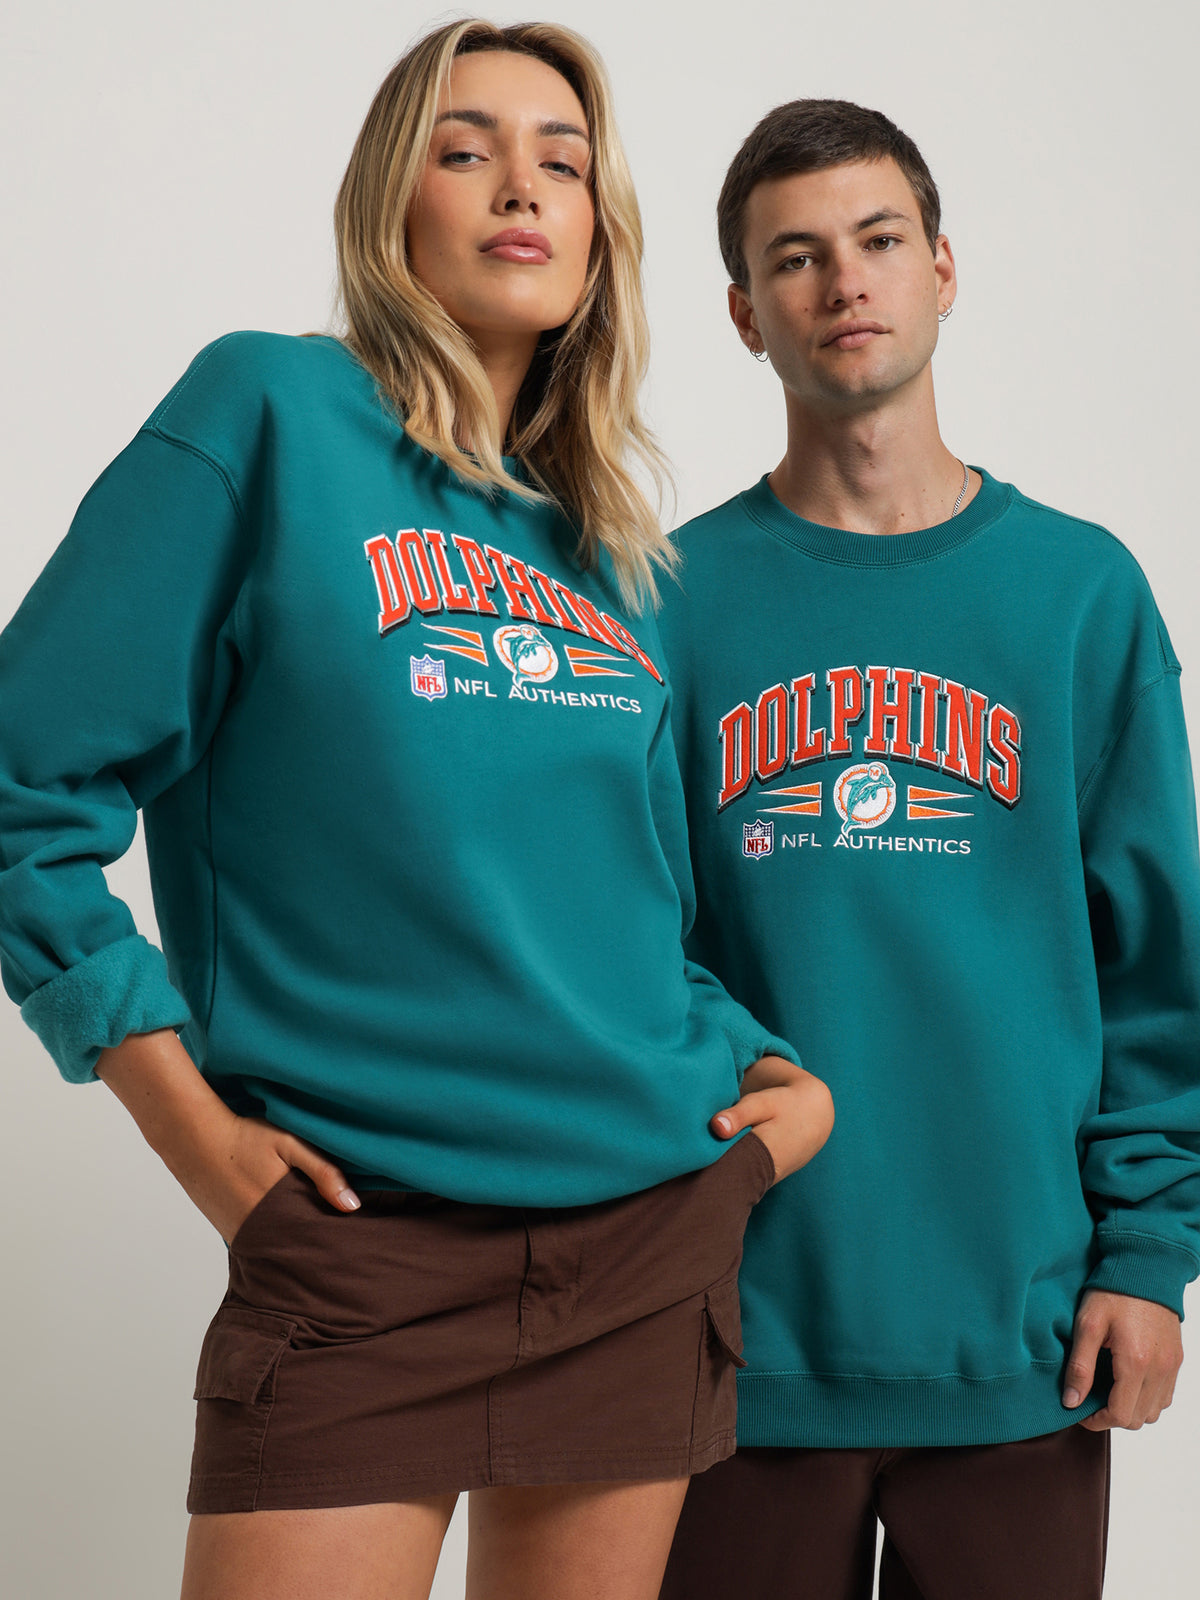 Miami Dolphins Crew in Teal